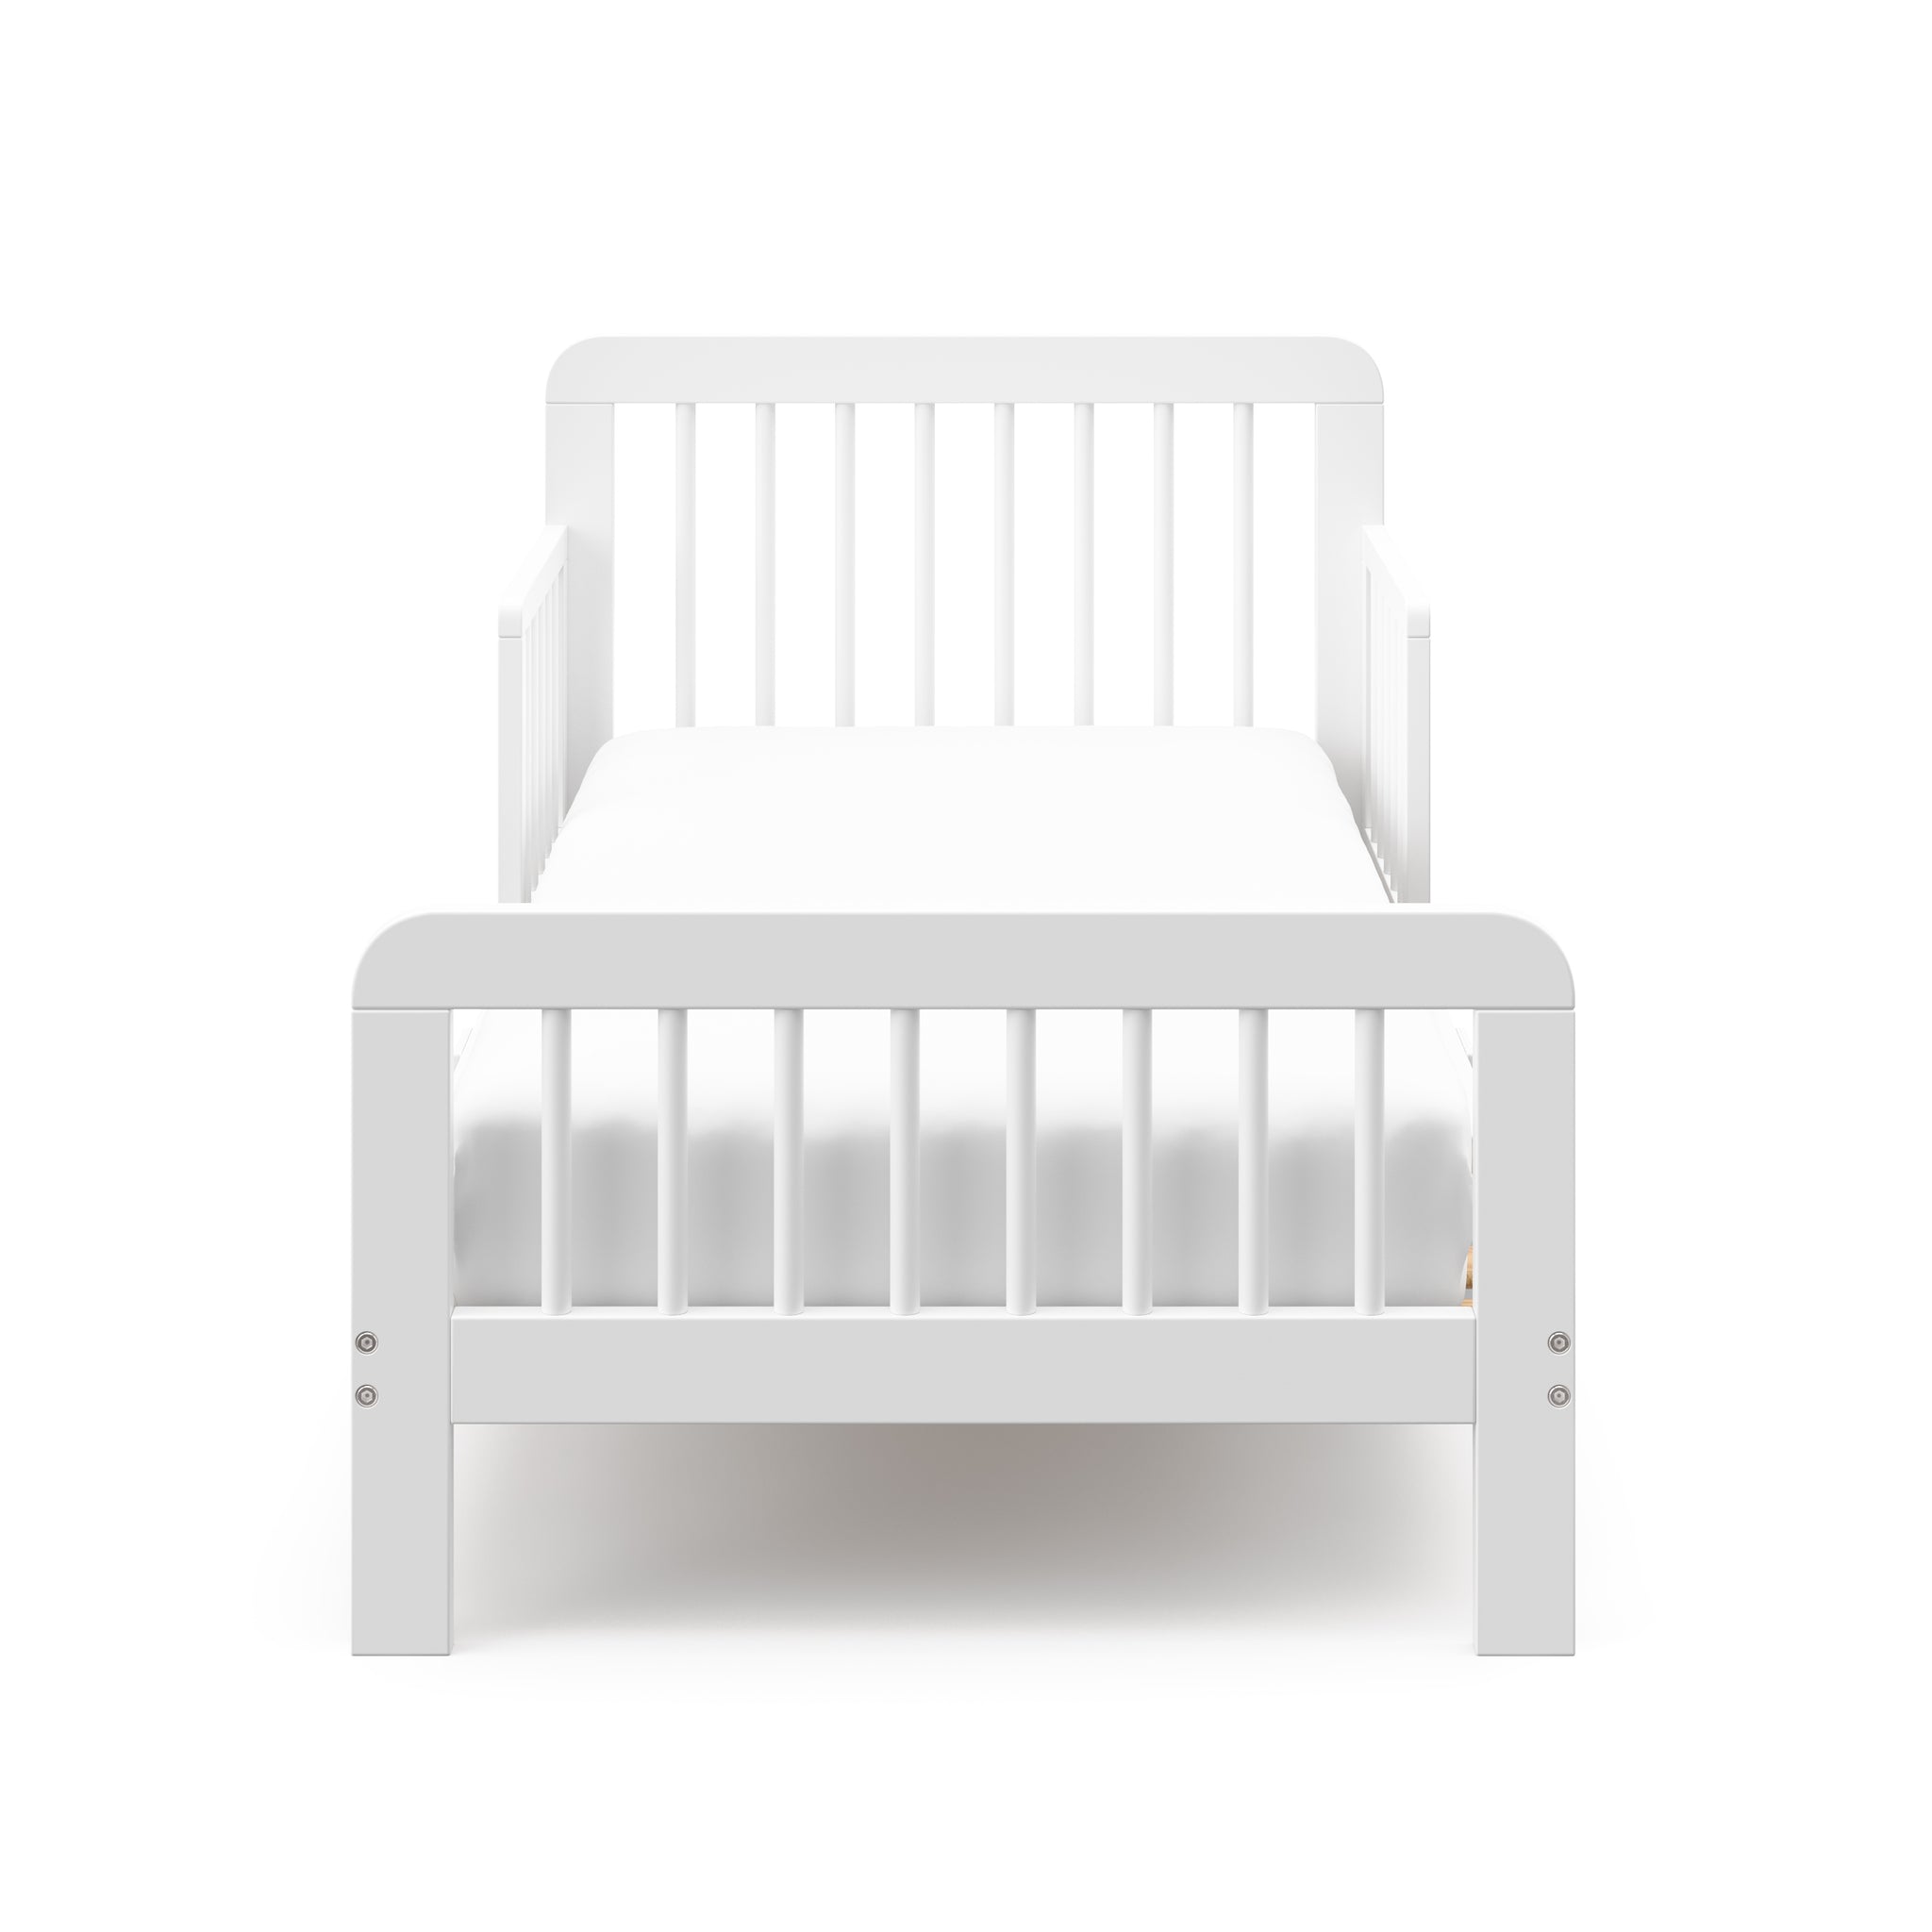 front view of a white toddler bed